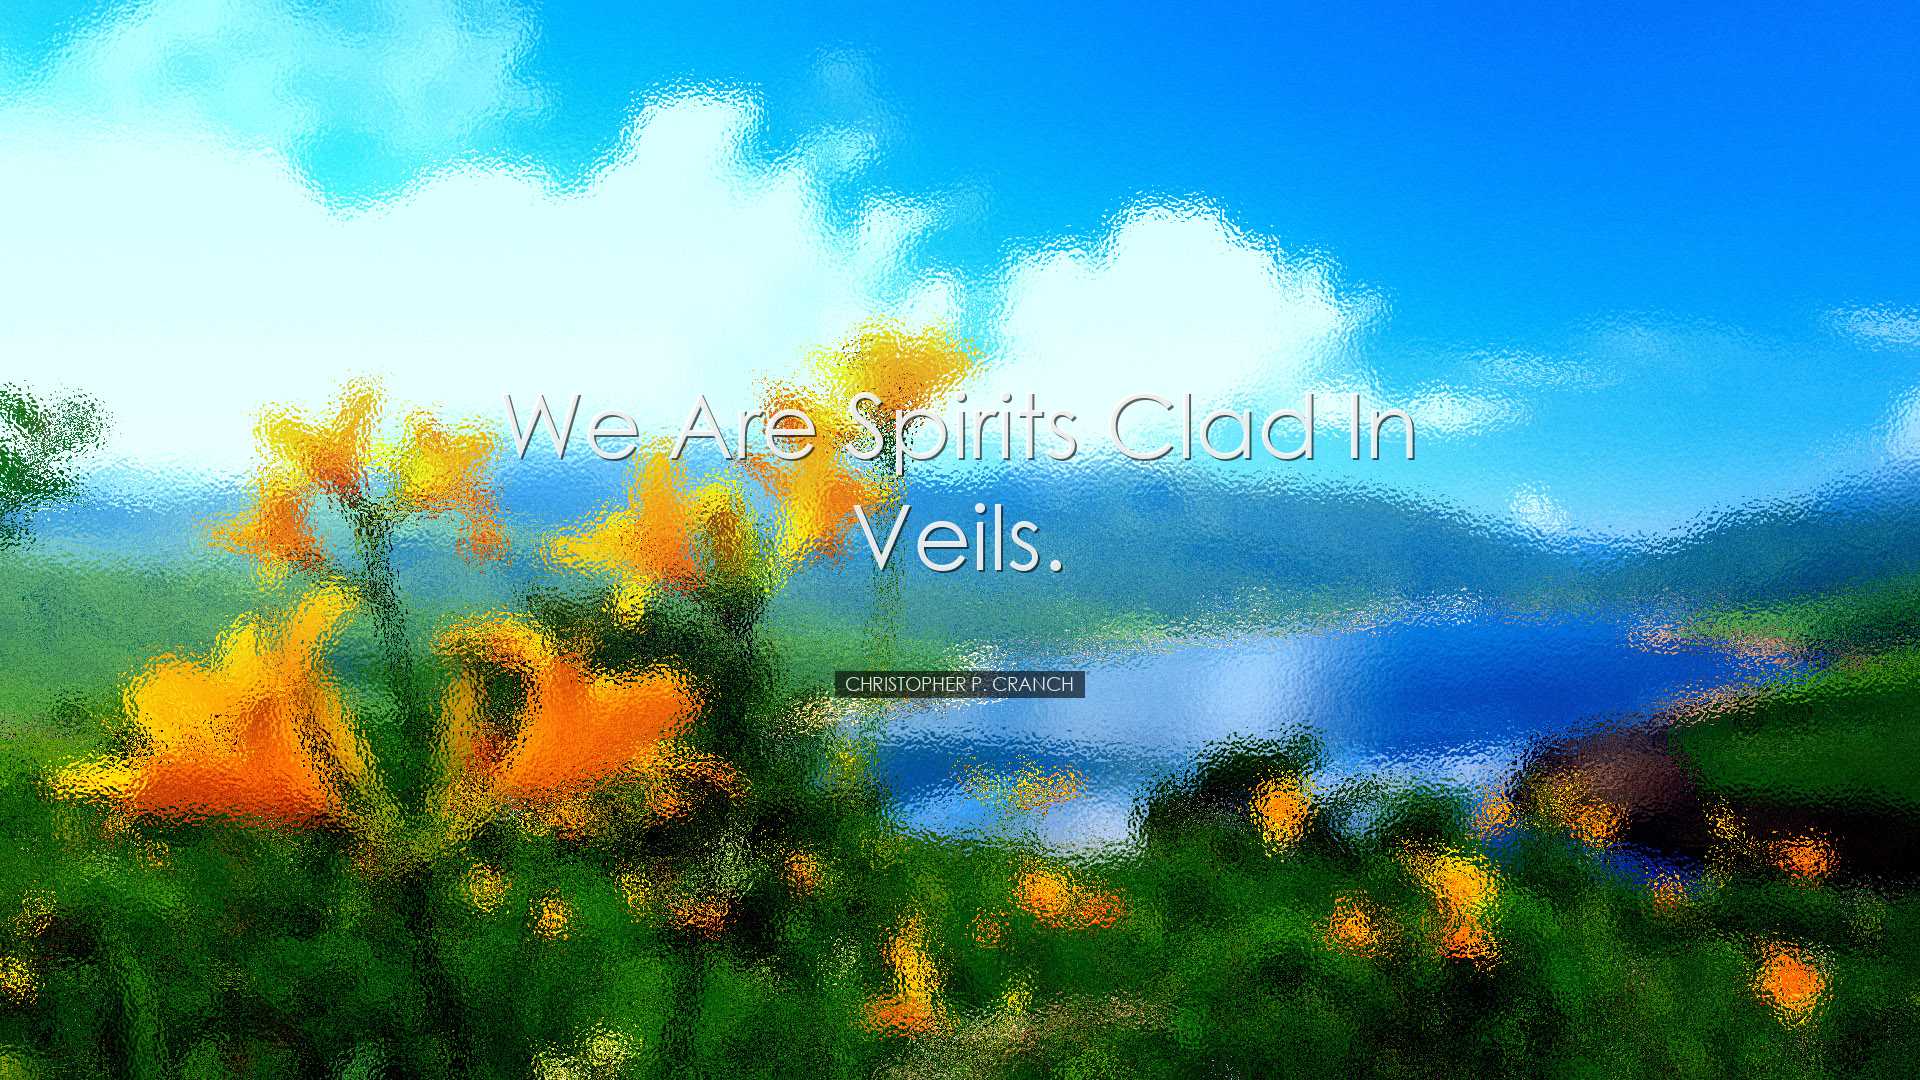 We are spirits clad in veils. - Christopher P. Cranch